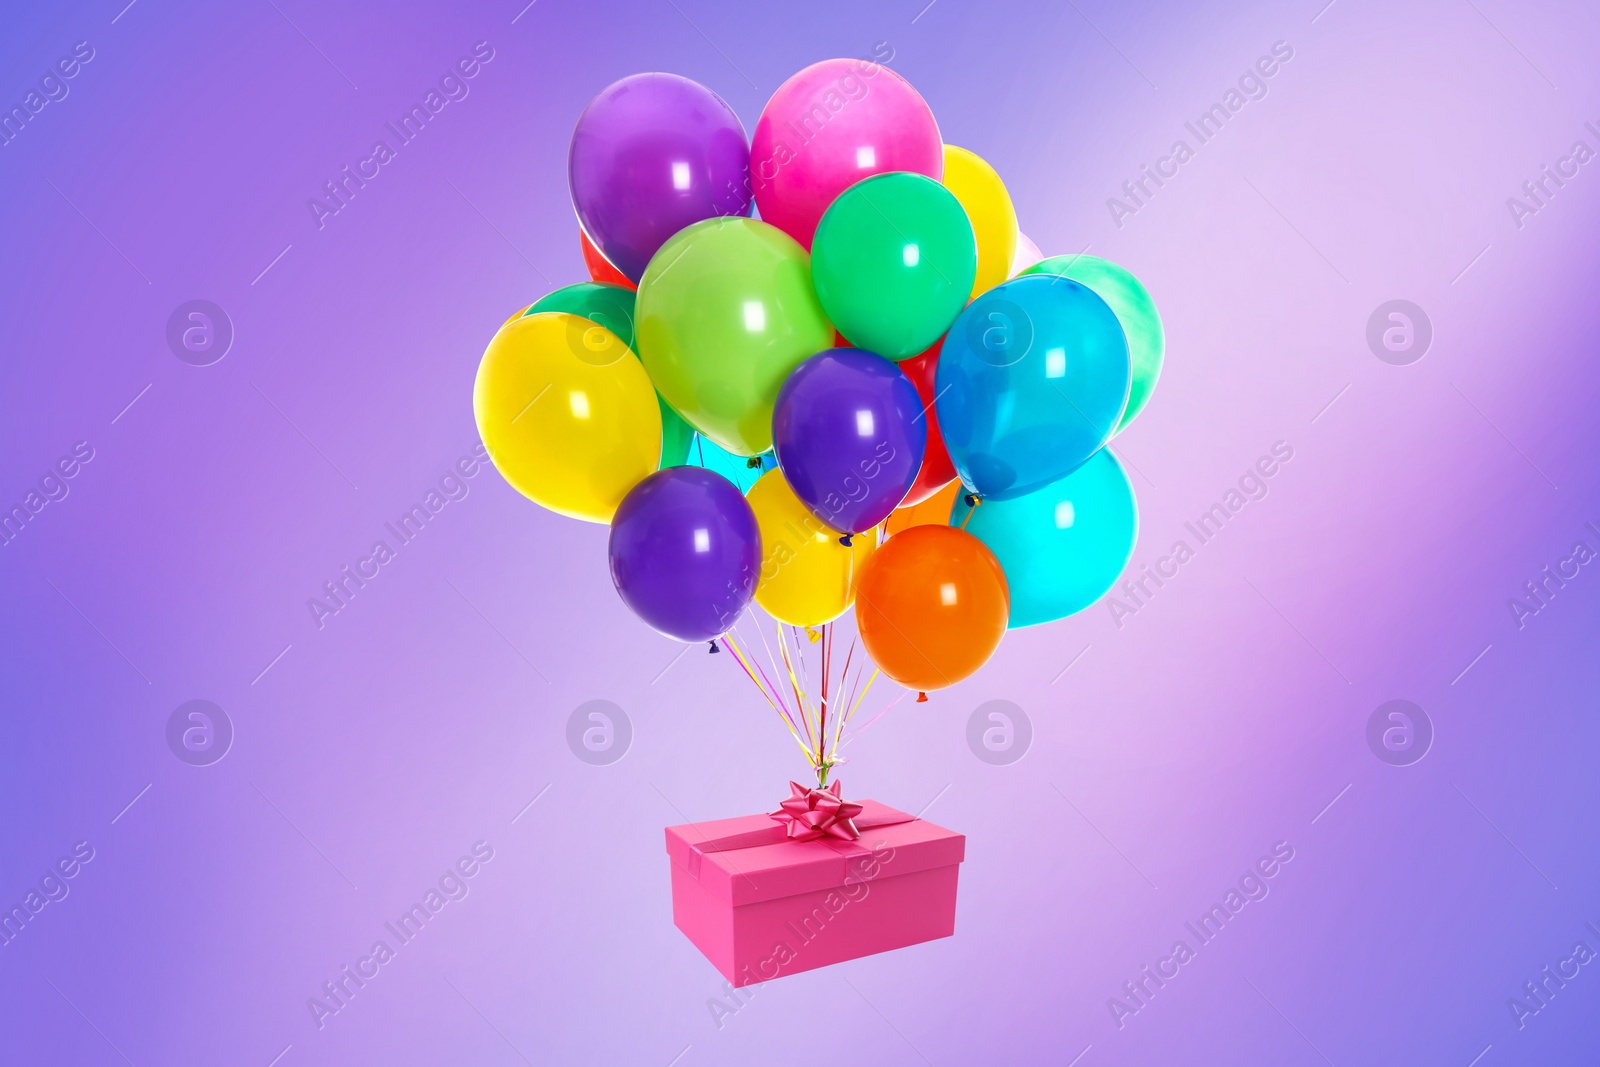 Image of Many balloons tied to pink gift box on bright background